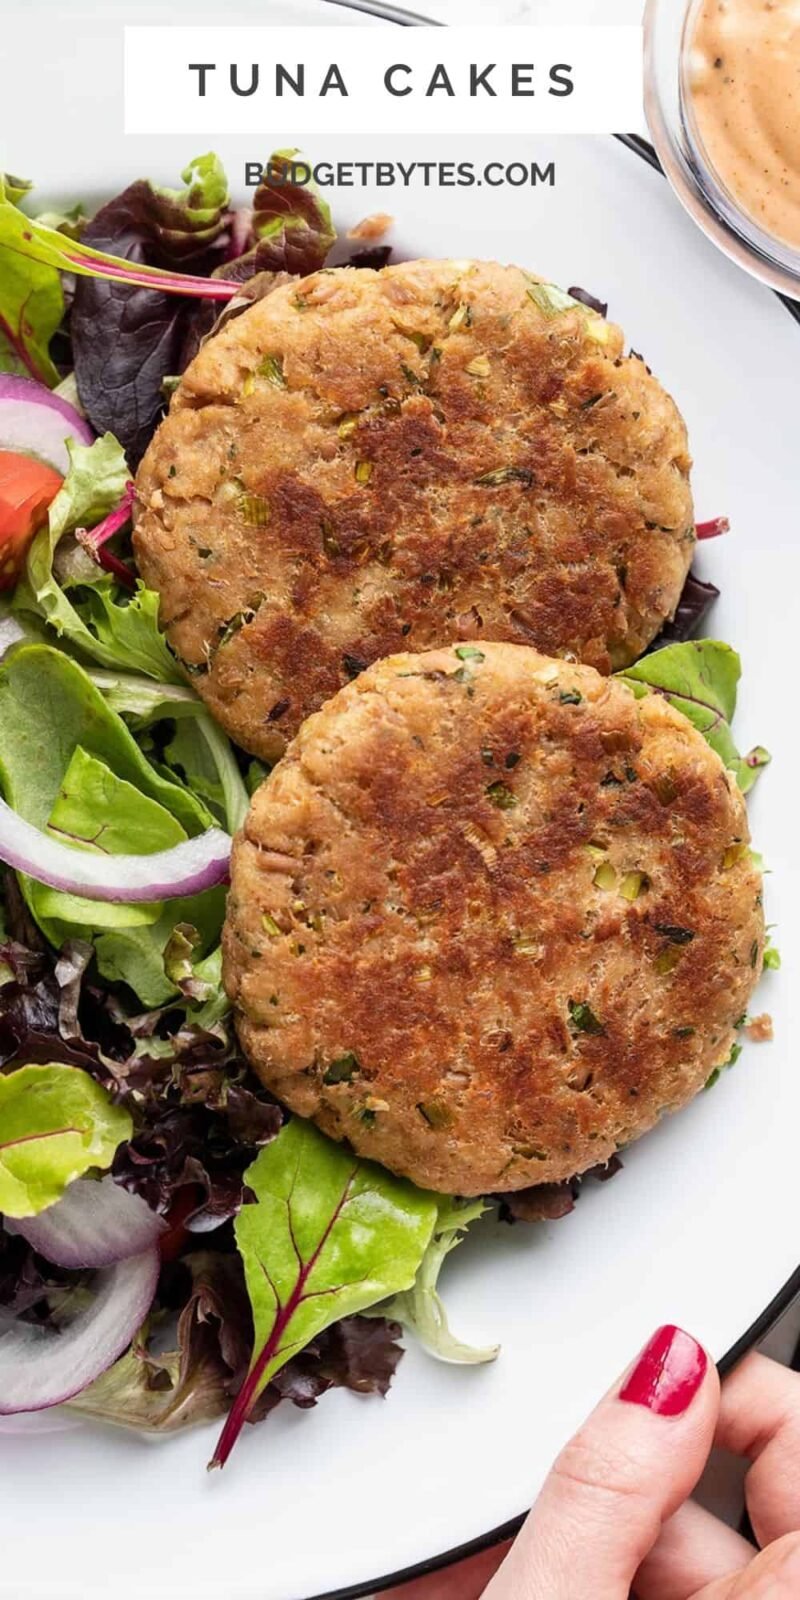 Overhead view of two tuna cakes on a plate with greens.